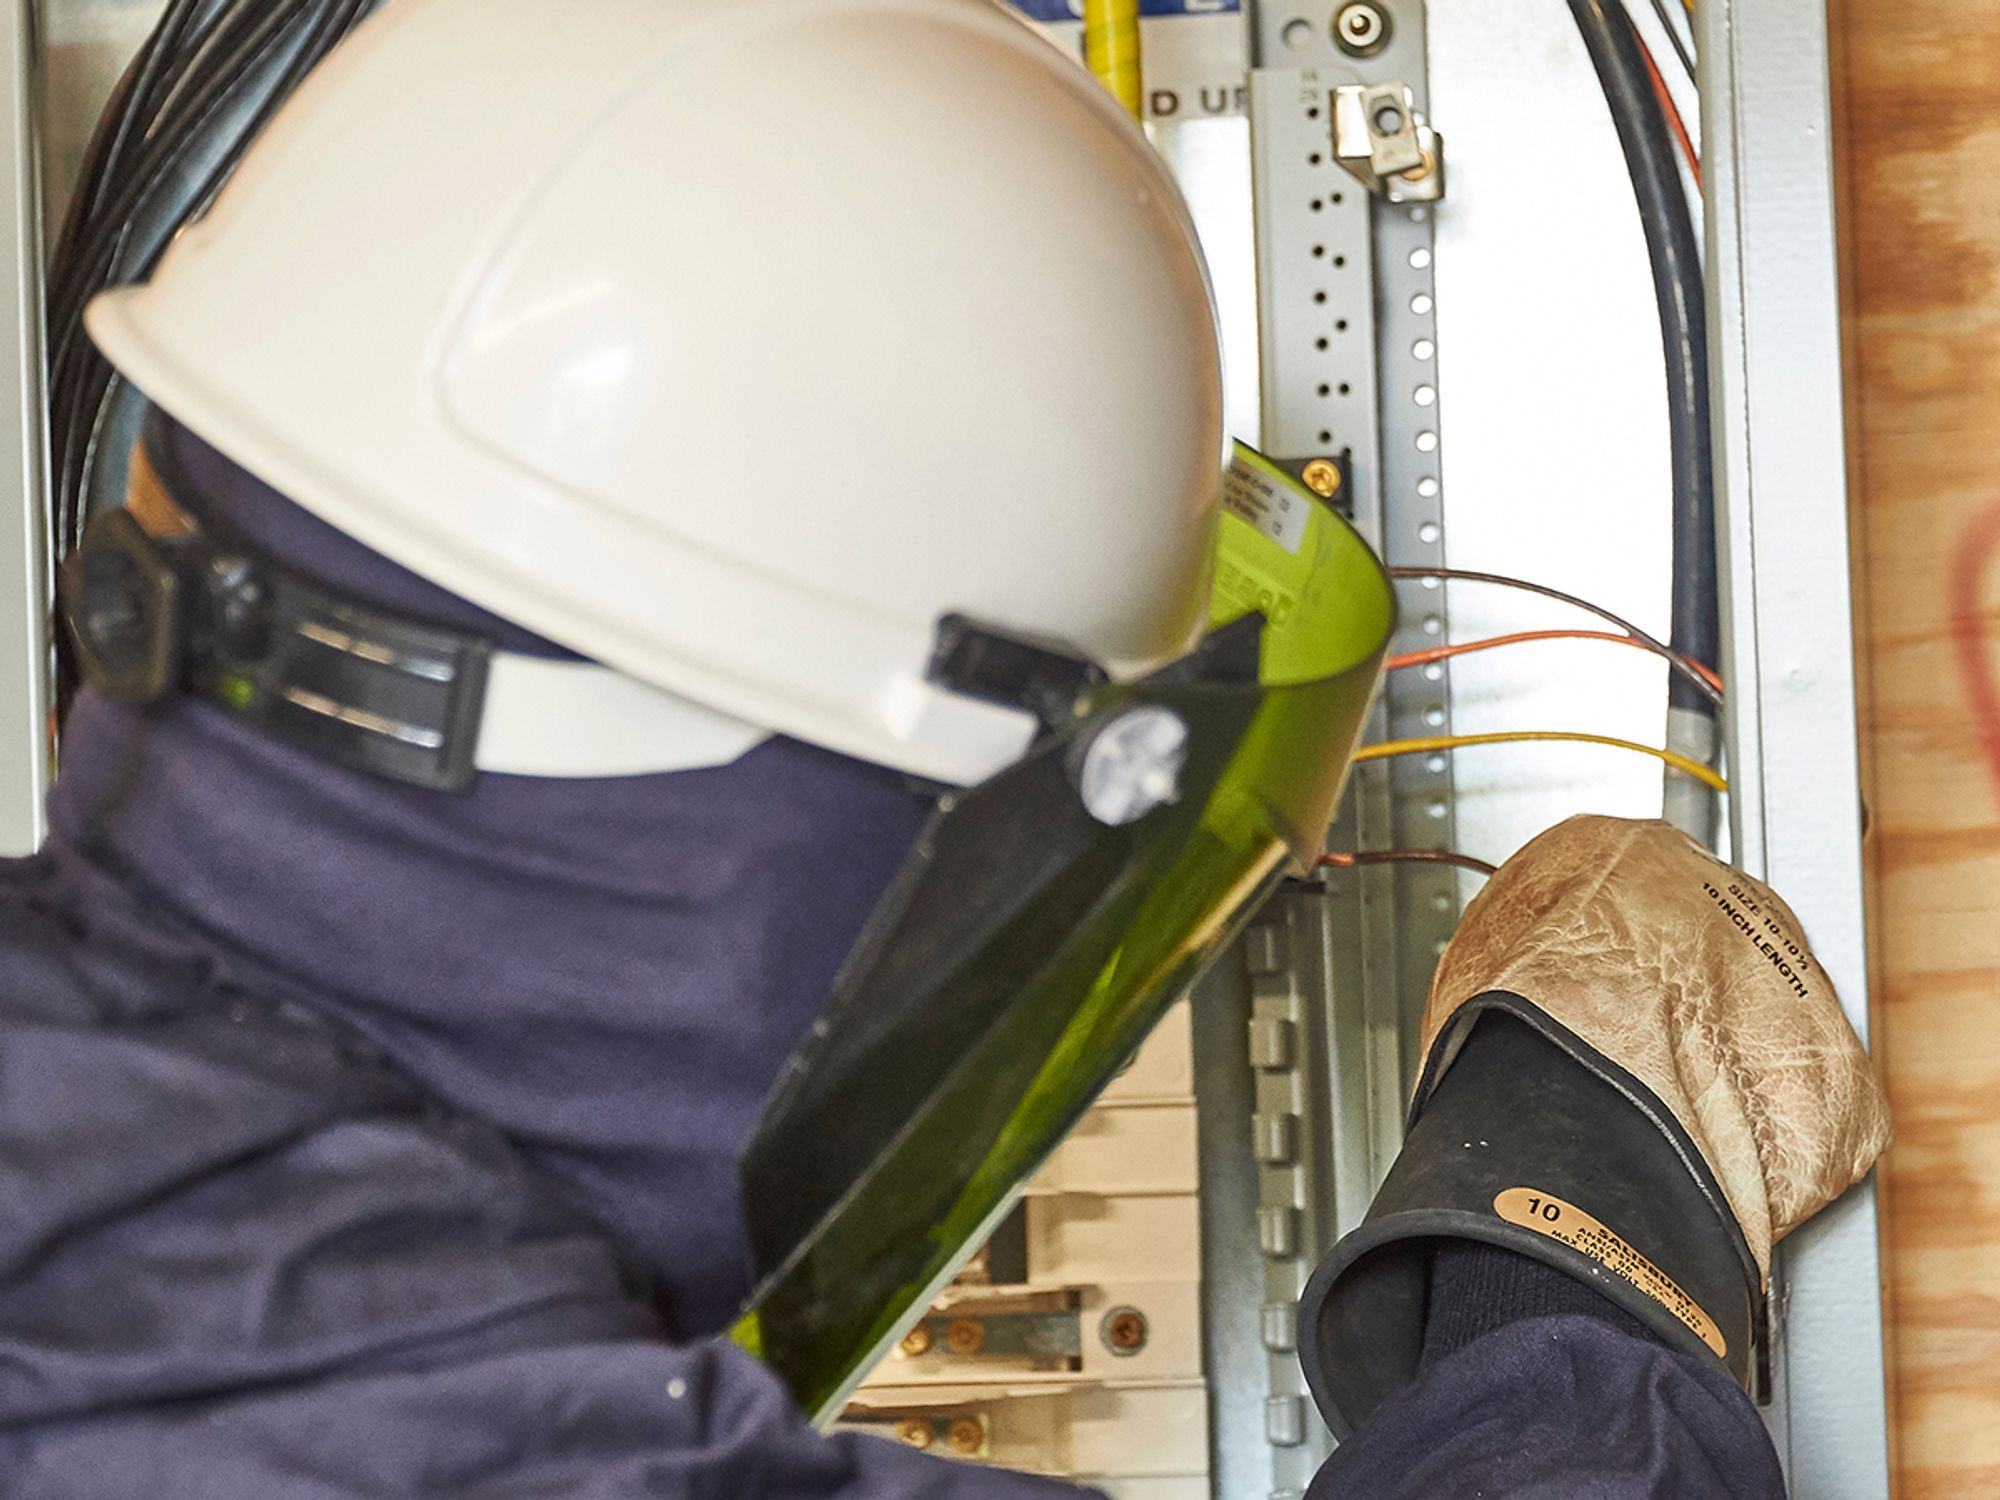 What are the requirements for electrical protective equipment, and who must comply?